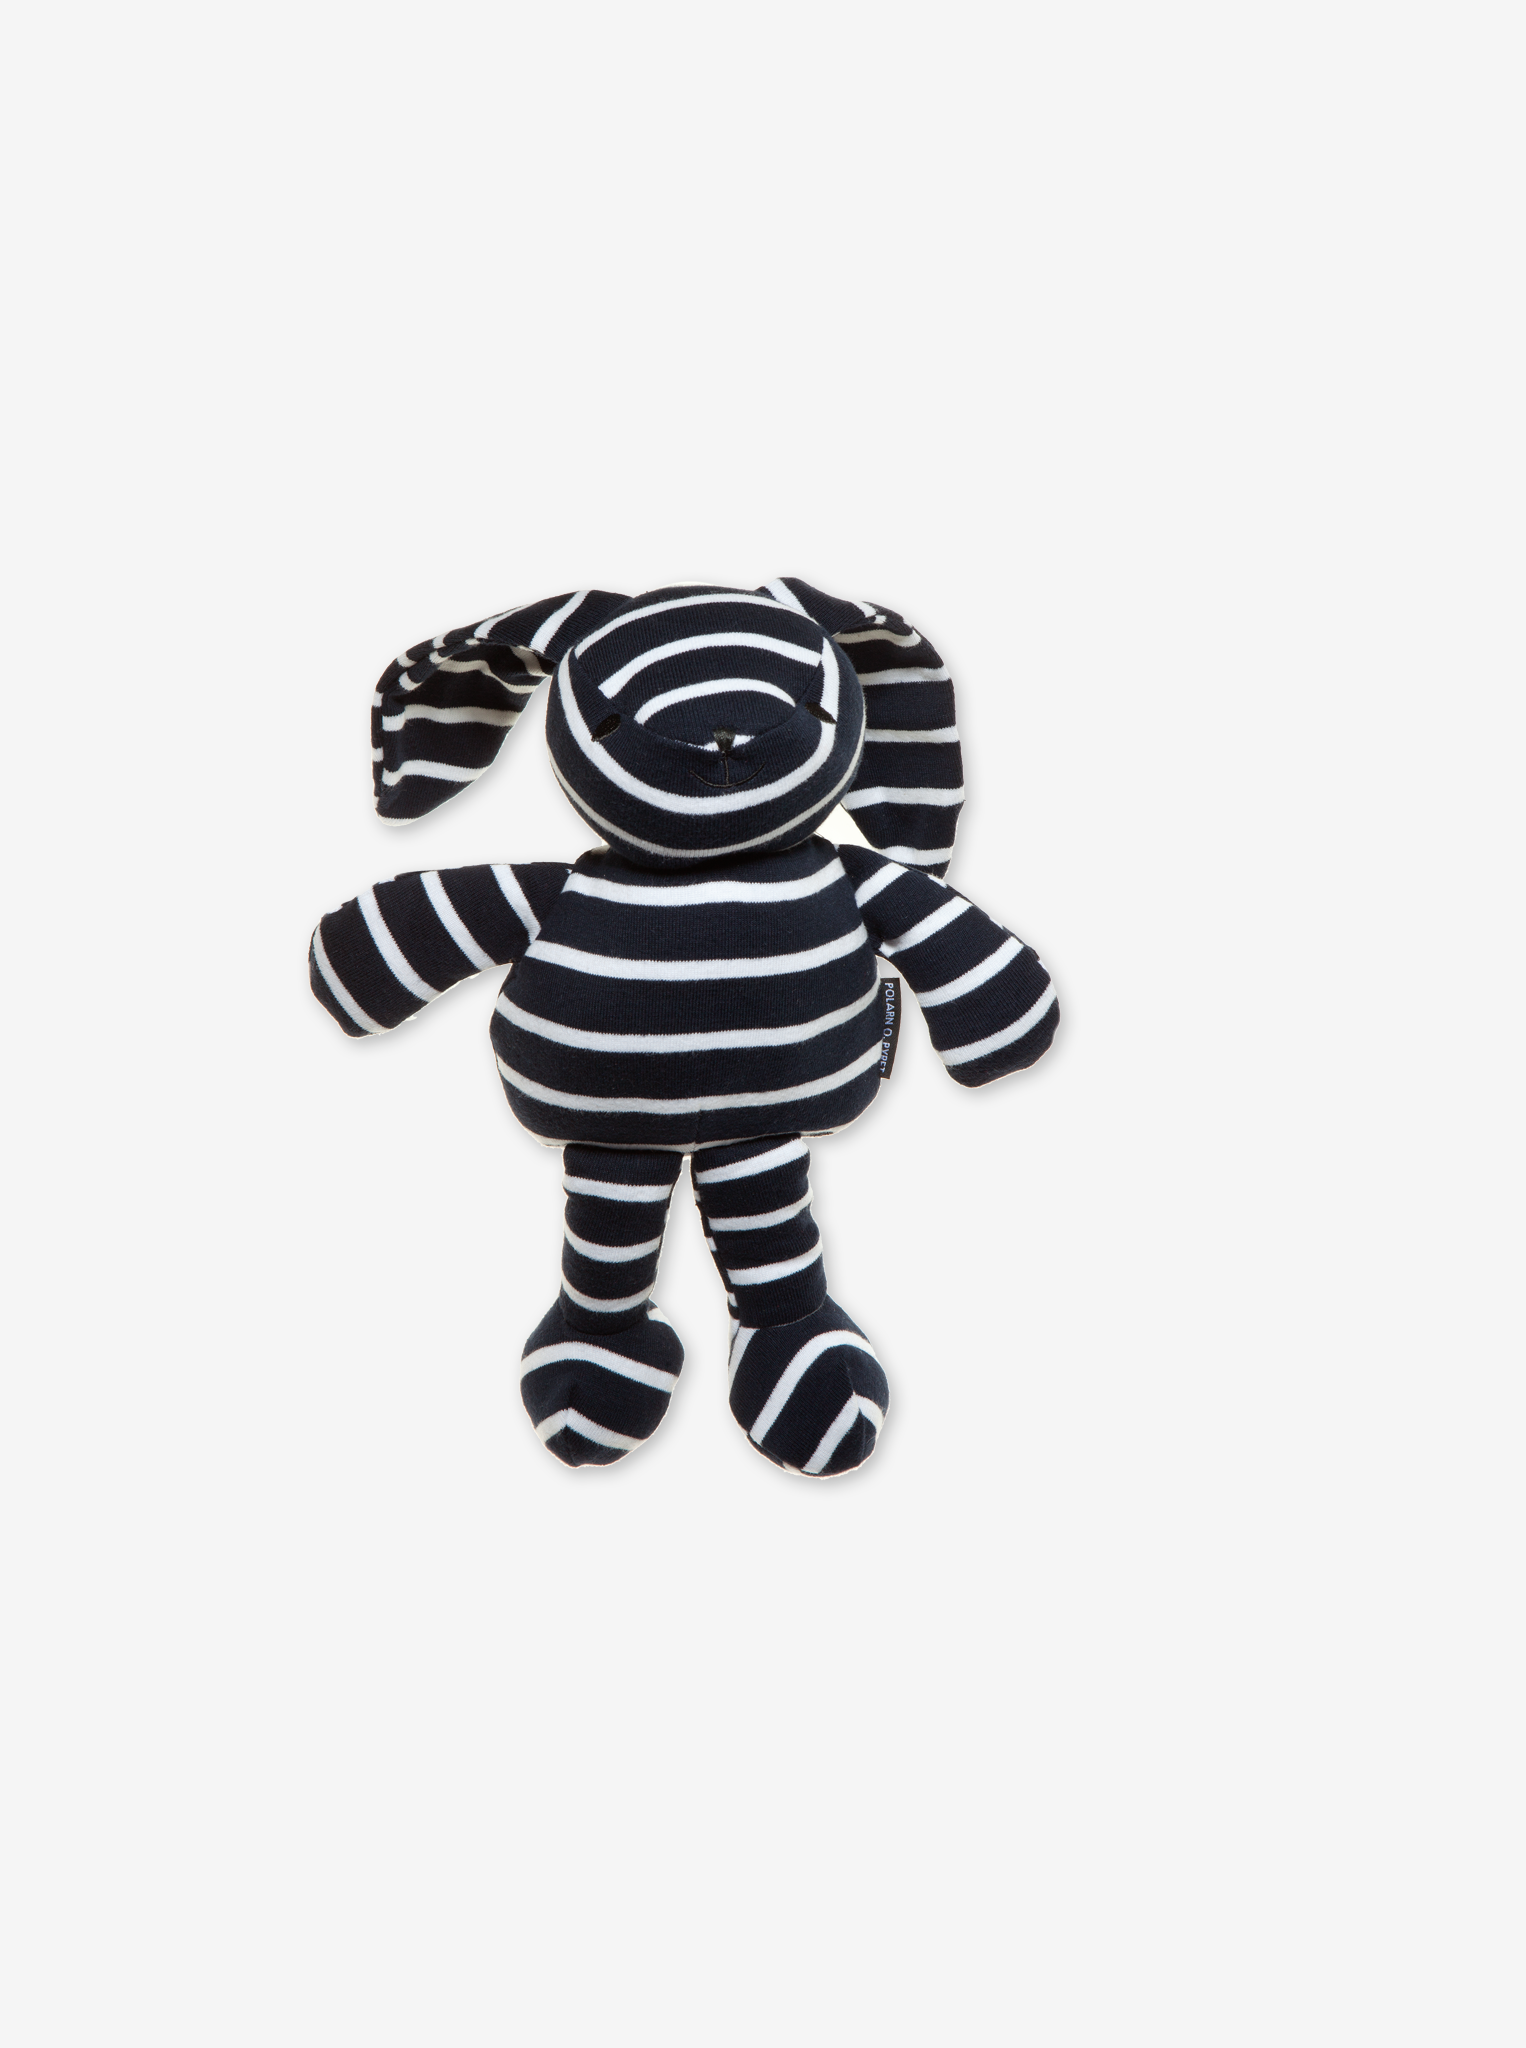 soft navy and white striped PO.P bunny toy for kids